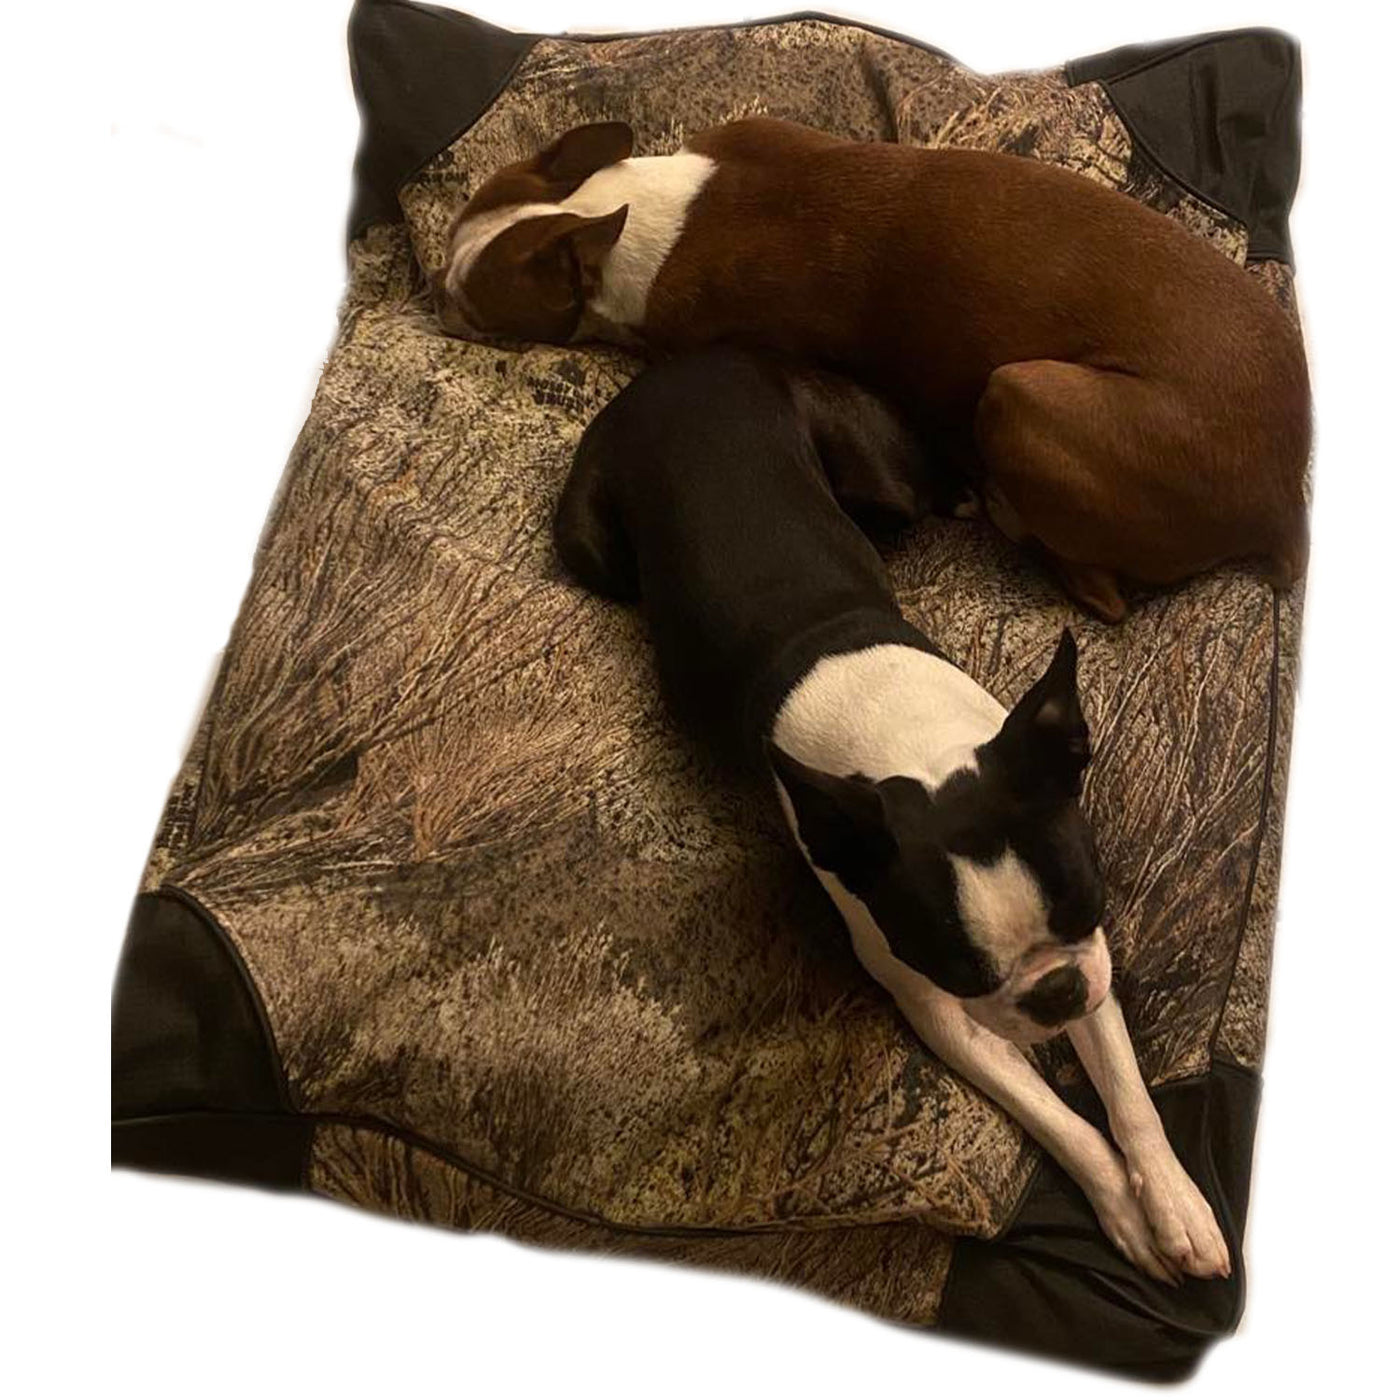 Dog bed with two small dogs